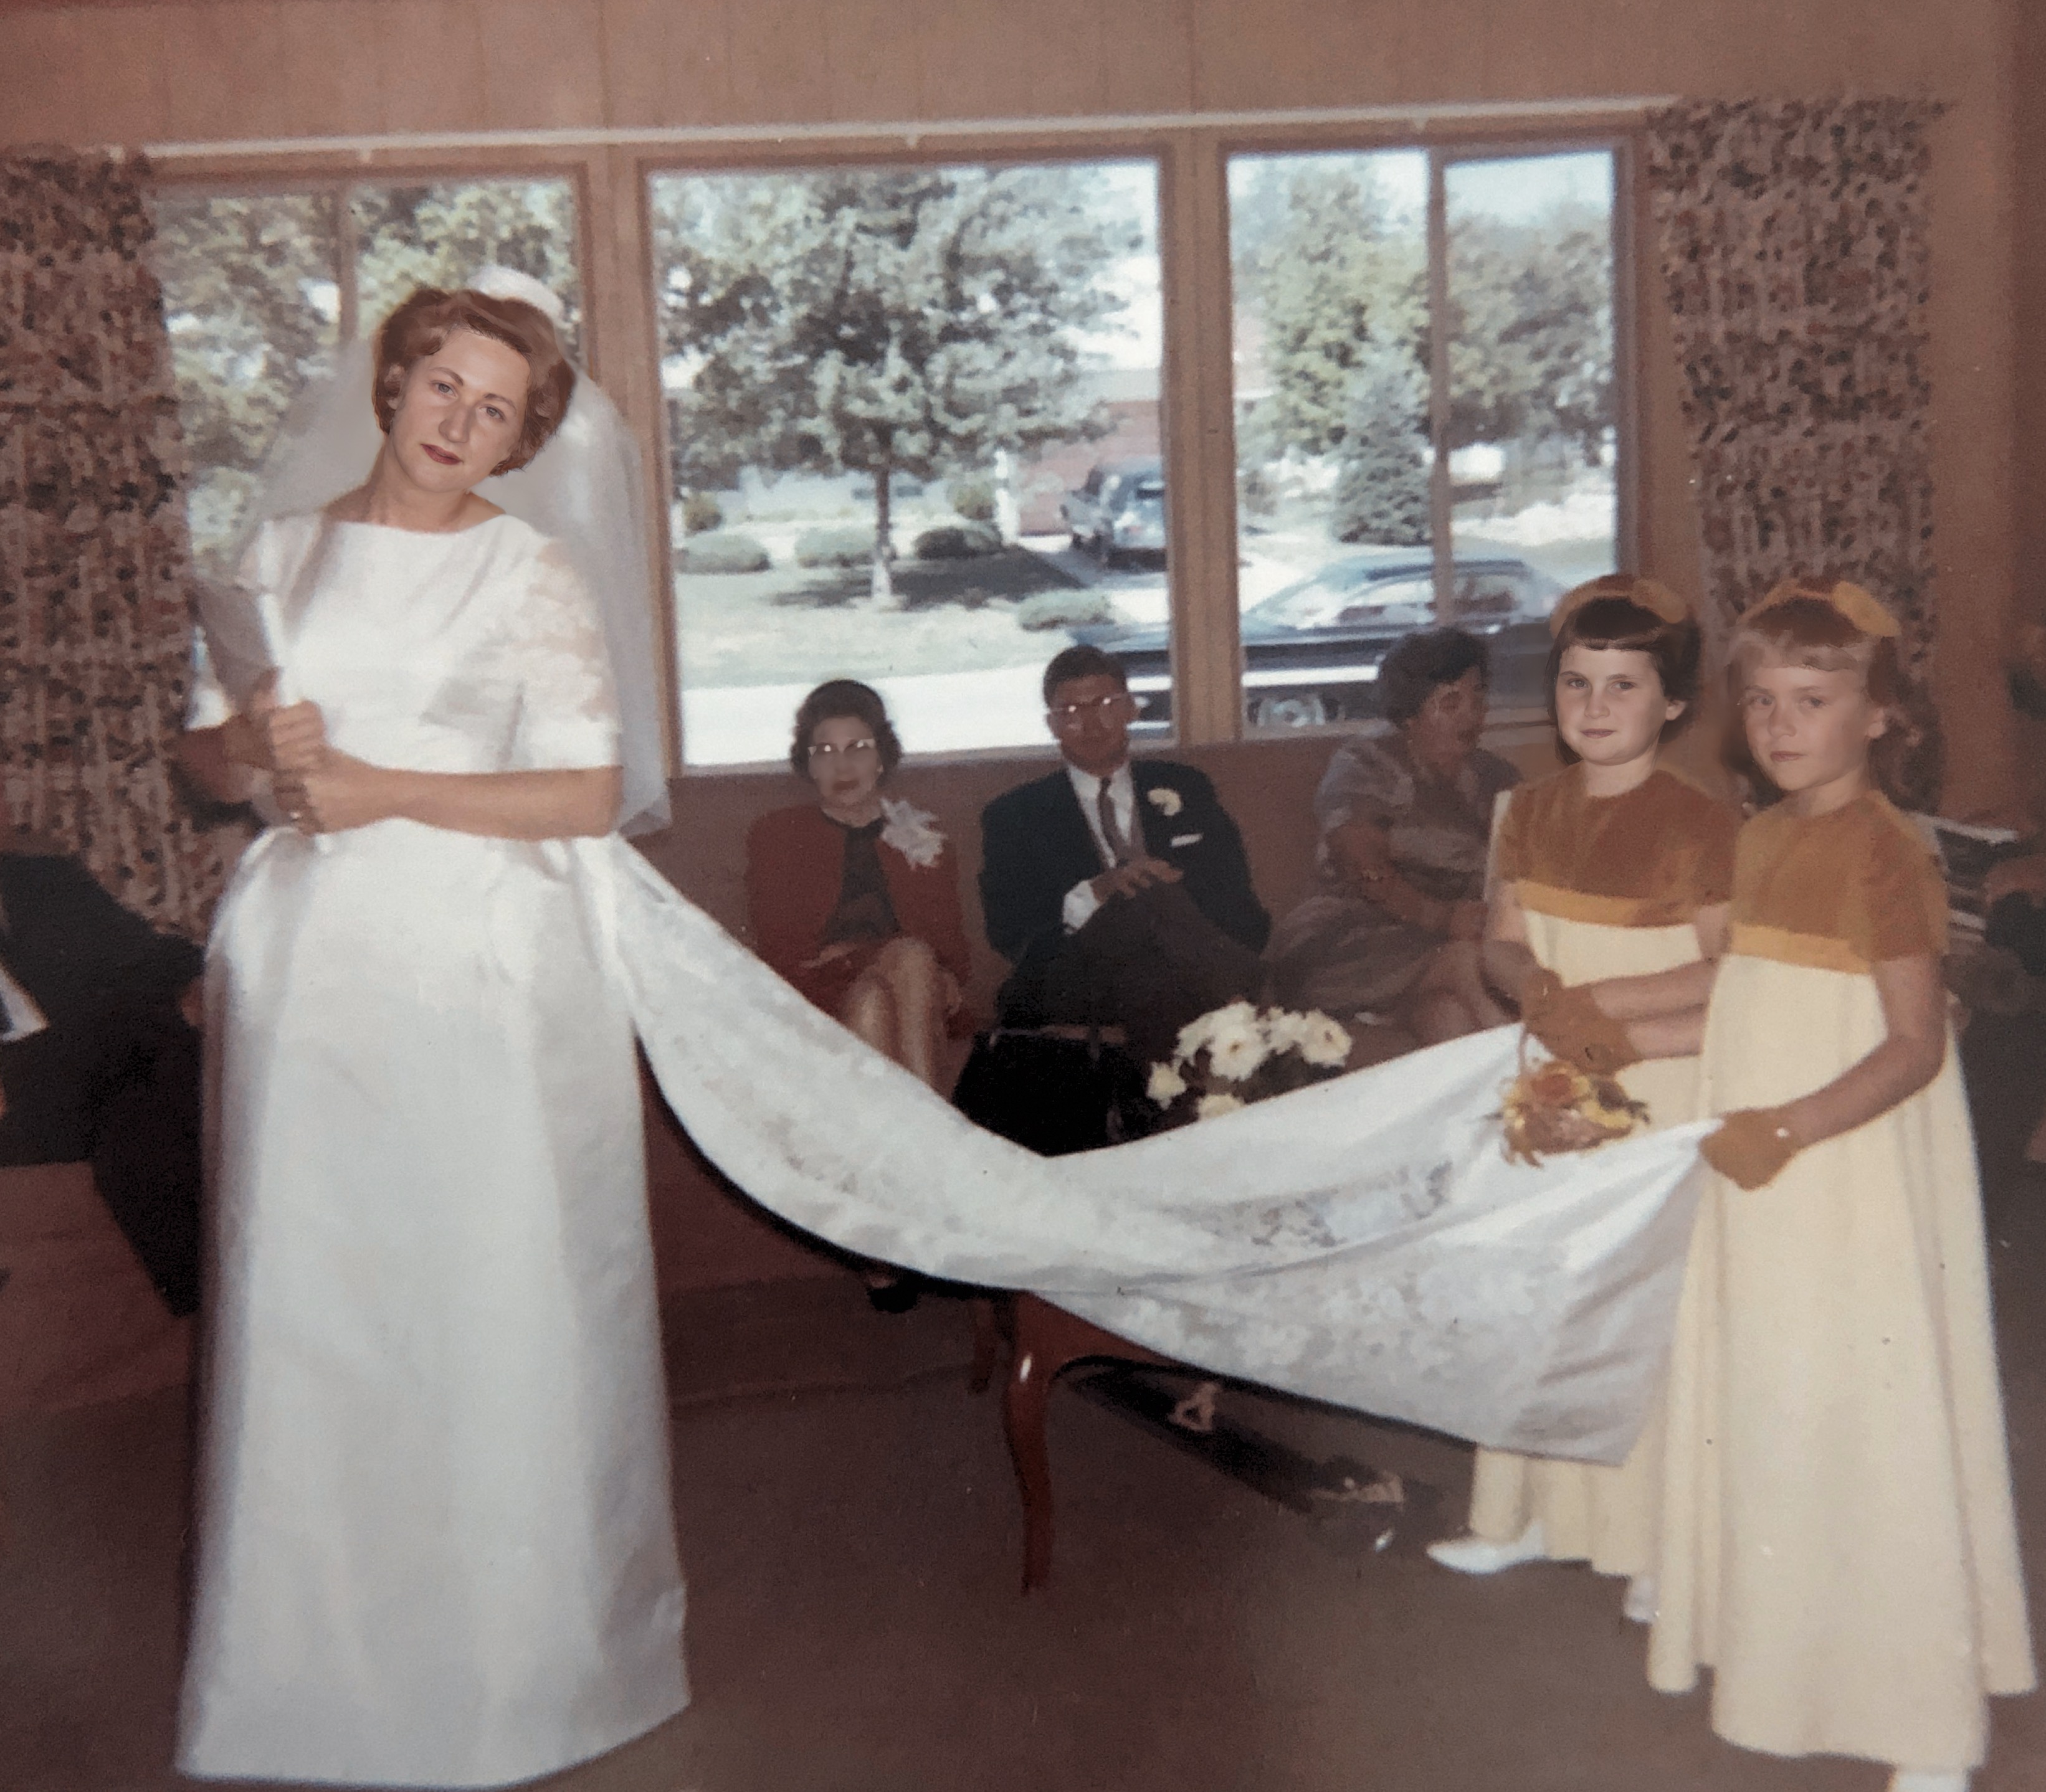 Aunt Kathy Kelbley with her flower girls Anne Kelbley on the right September 1964